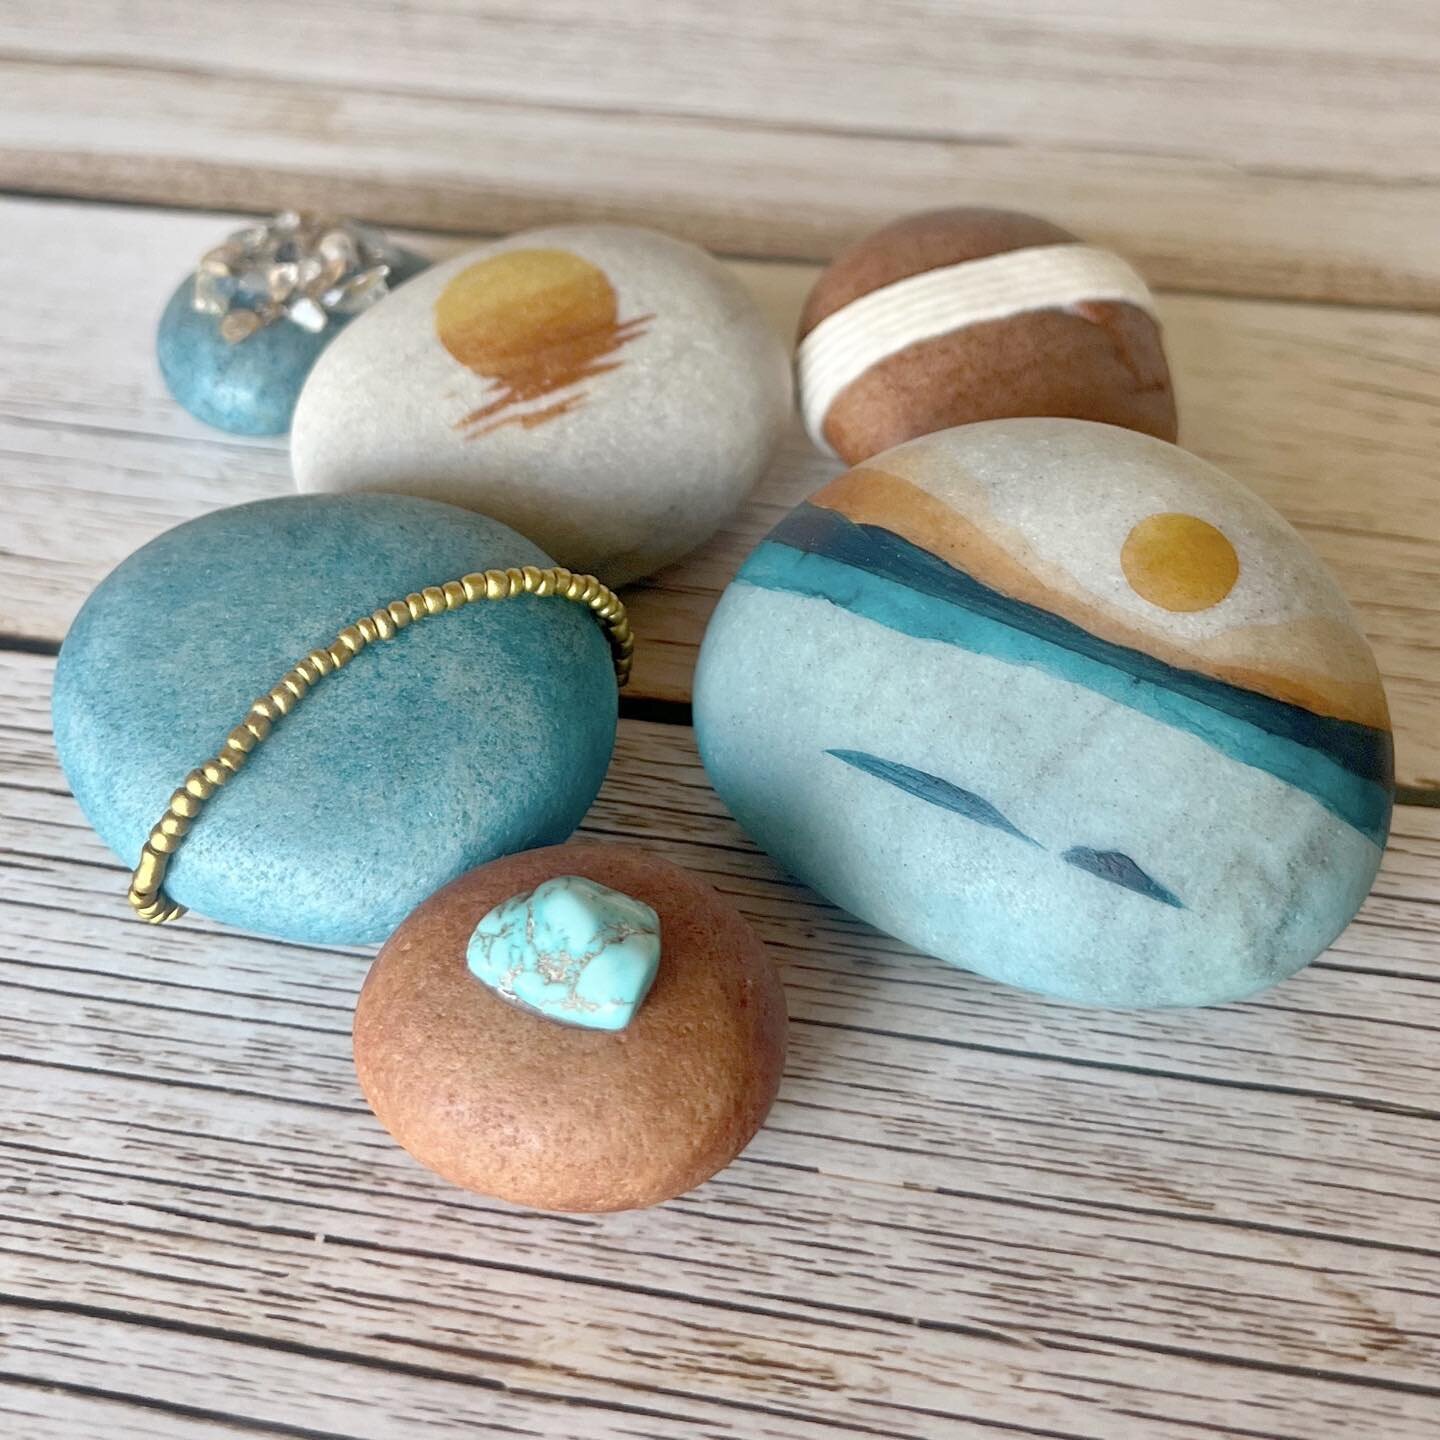 We love adding a little bling to our stones ✨